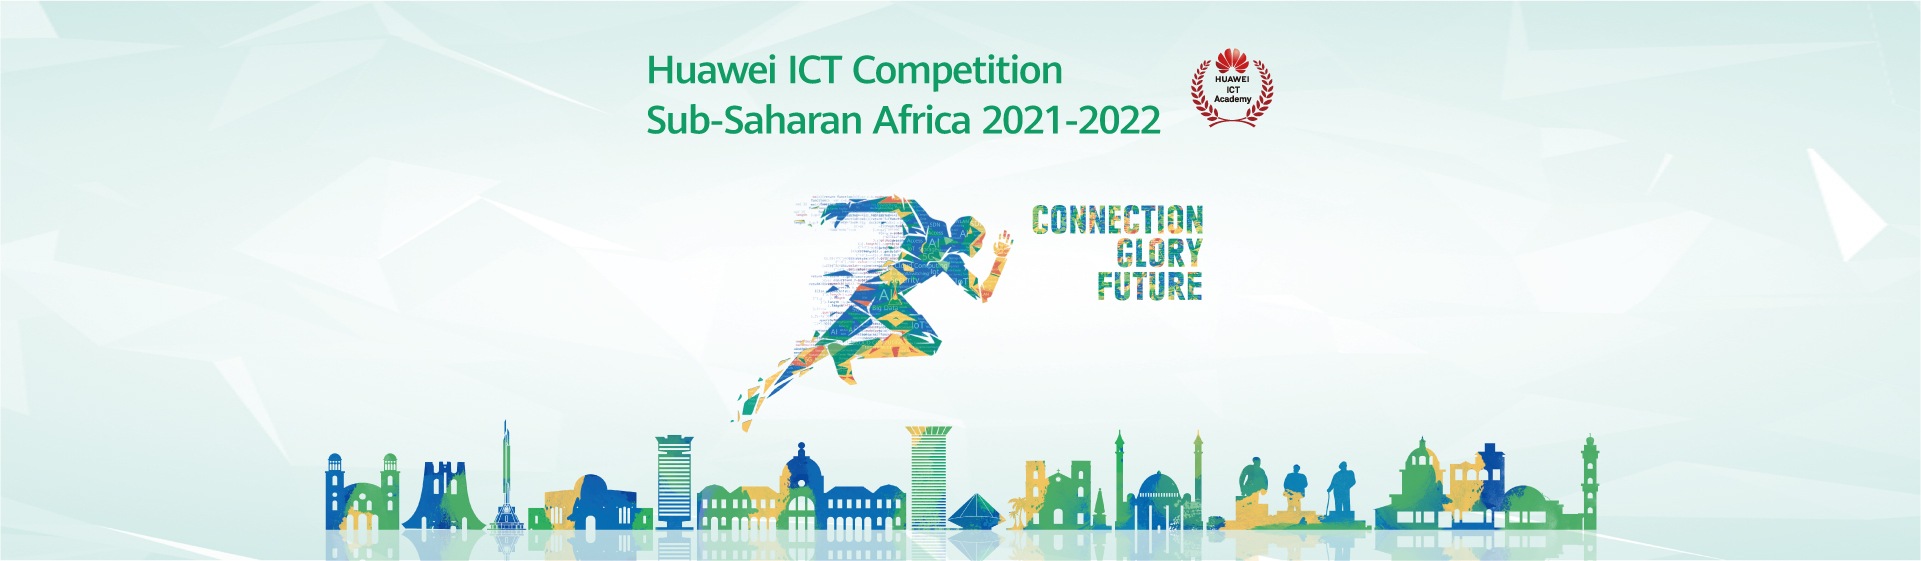 Huawei ICT Competition Sub Saharan Africa 2021 2022